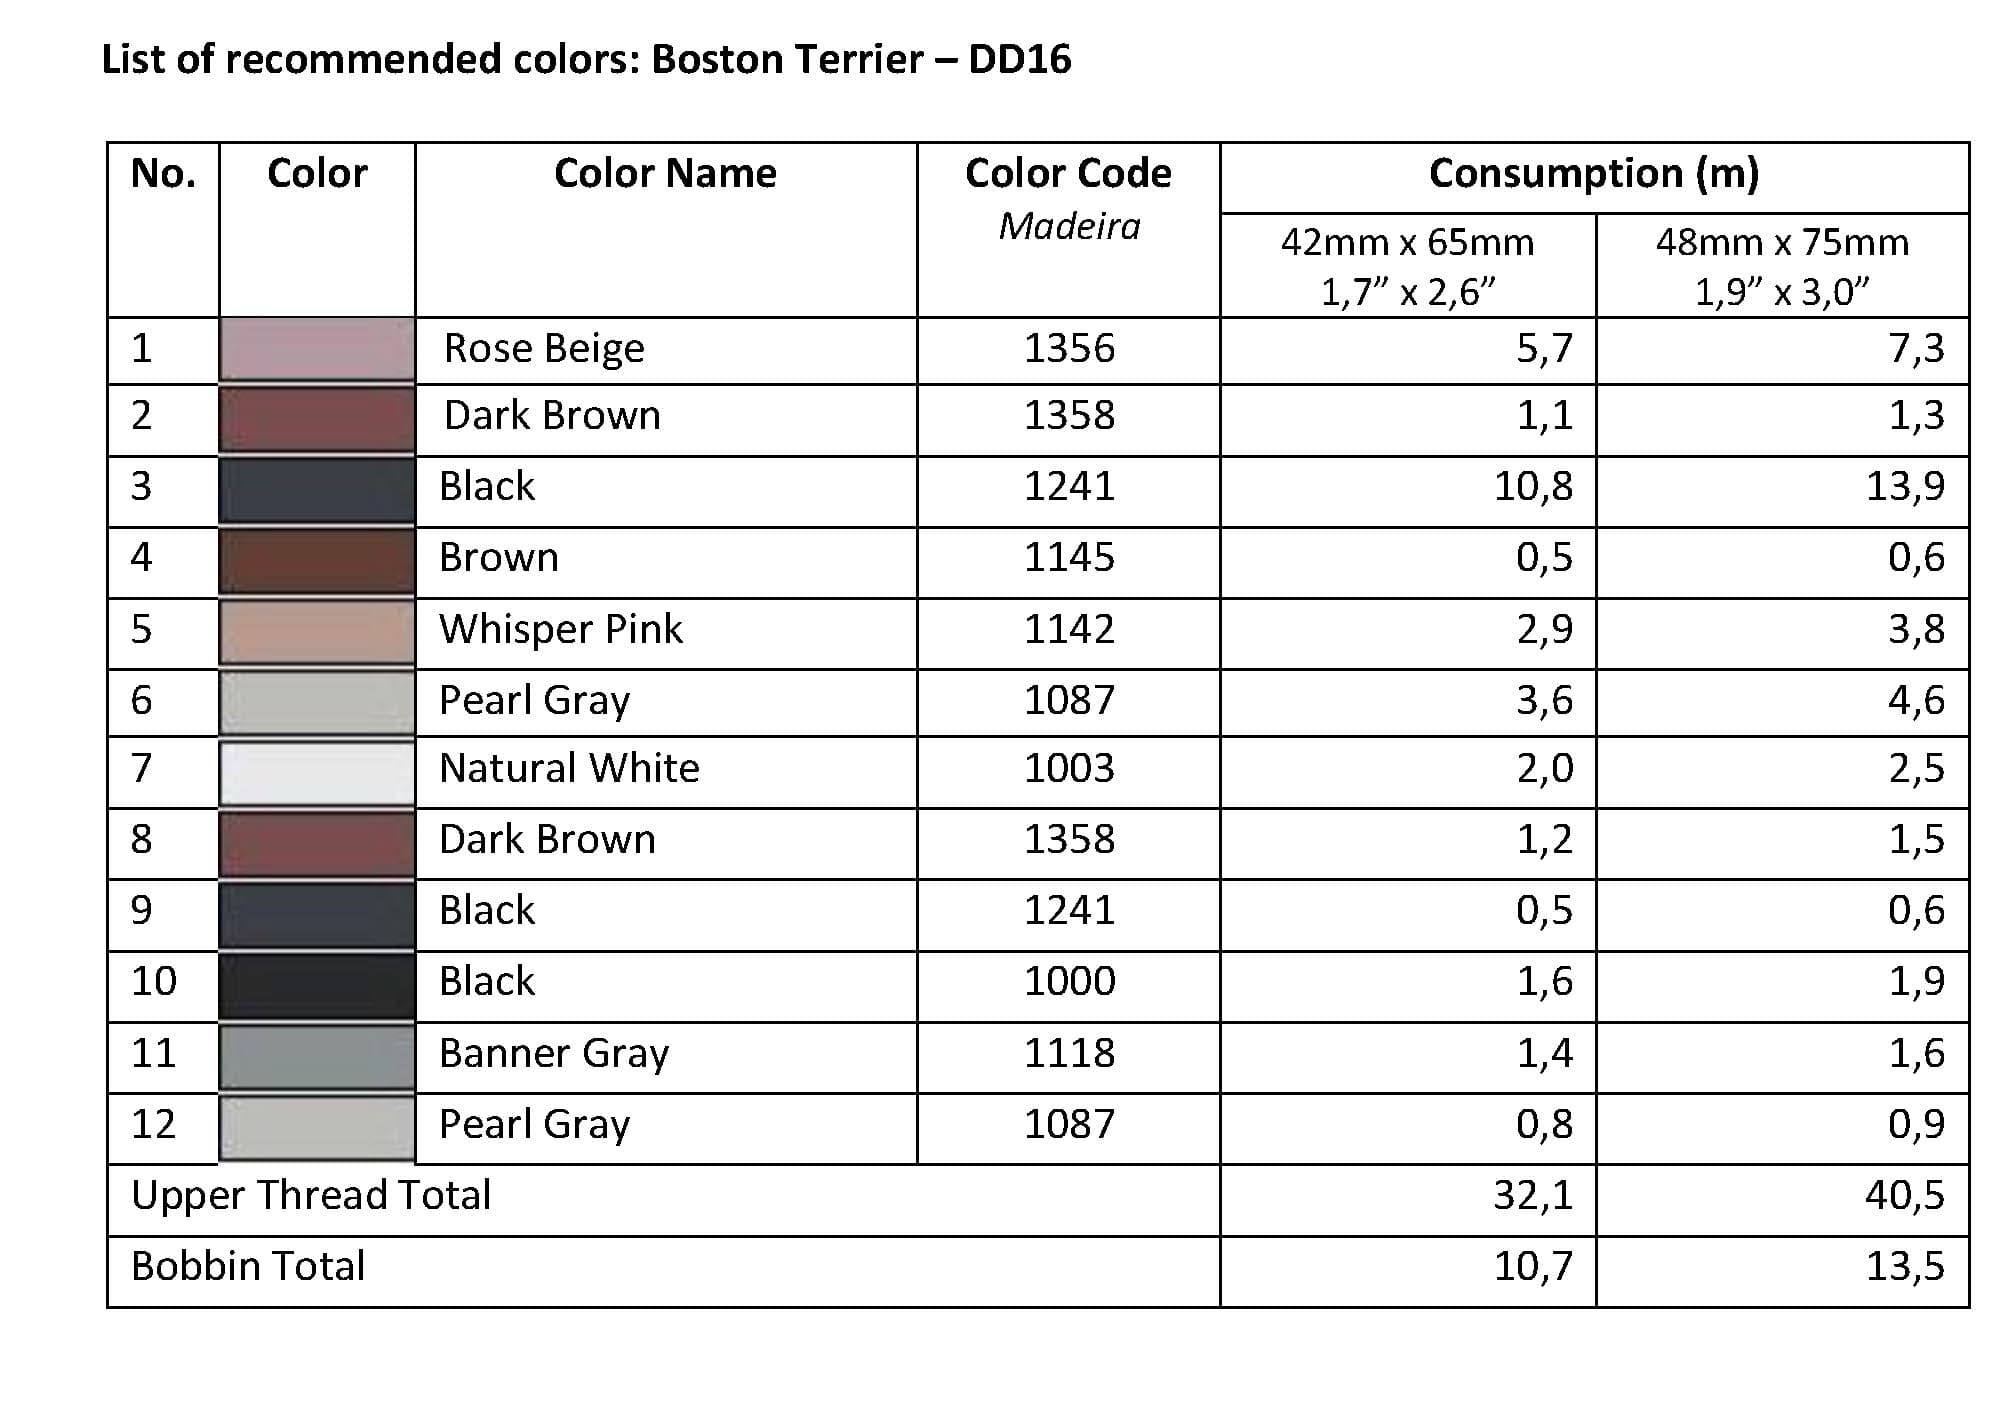 List of Recommended Colors - Boston Terrier DD16